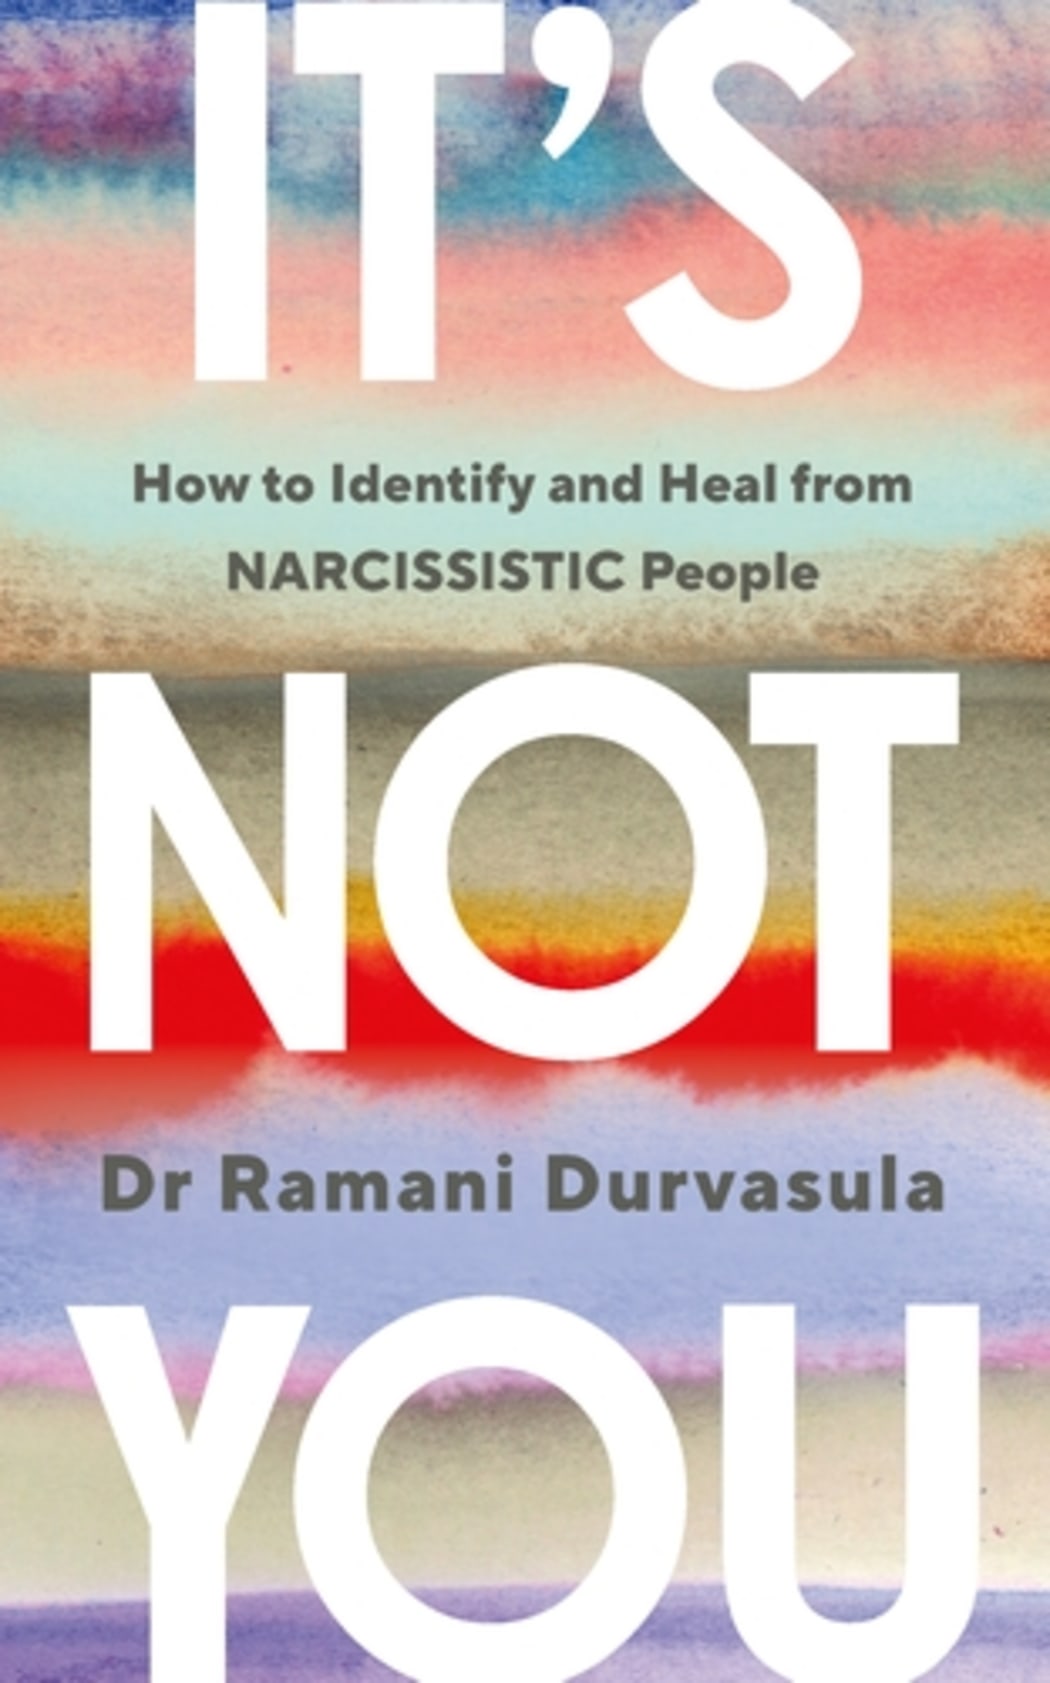 It's Not You book cover